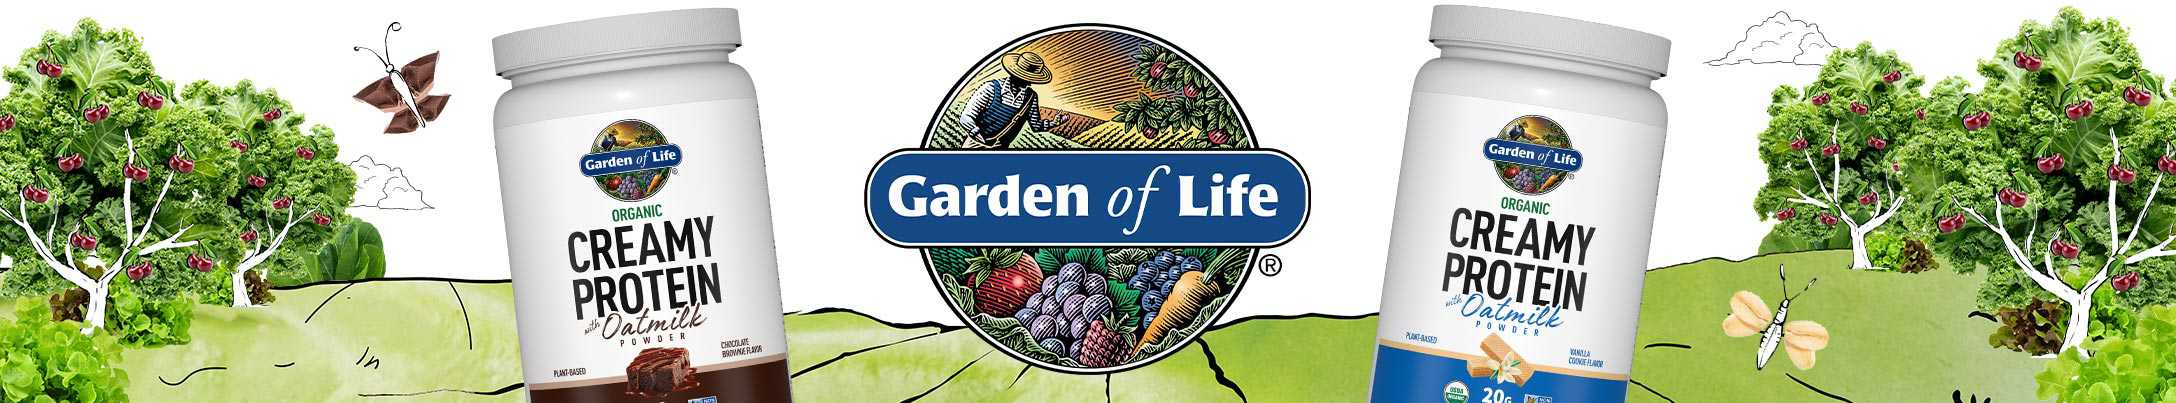 garden of life logo and protein products